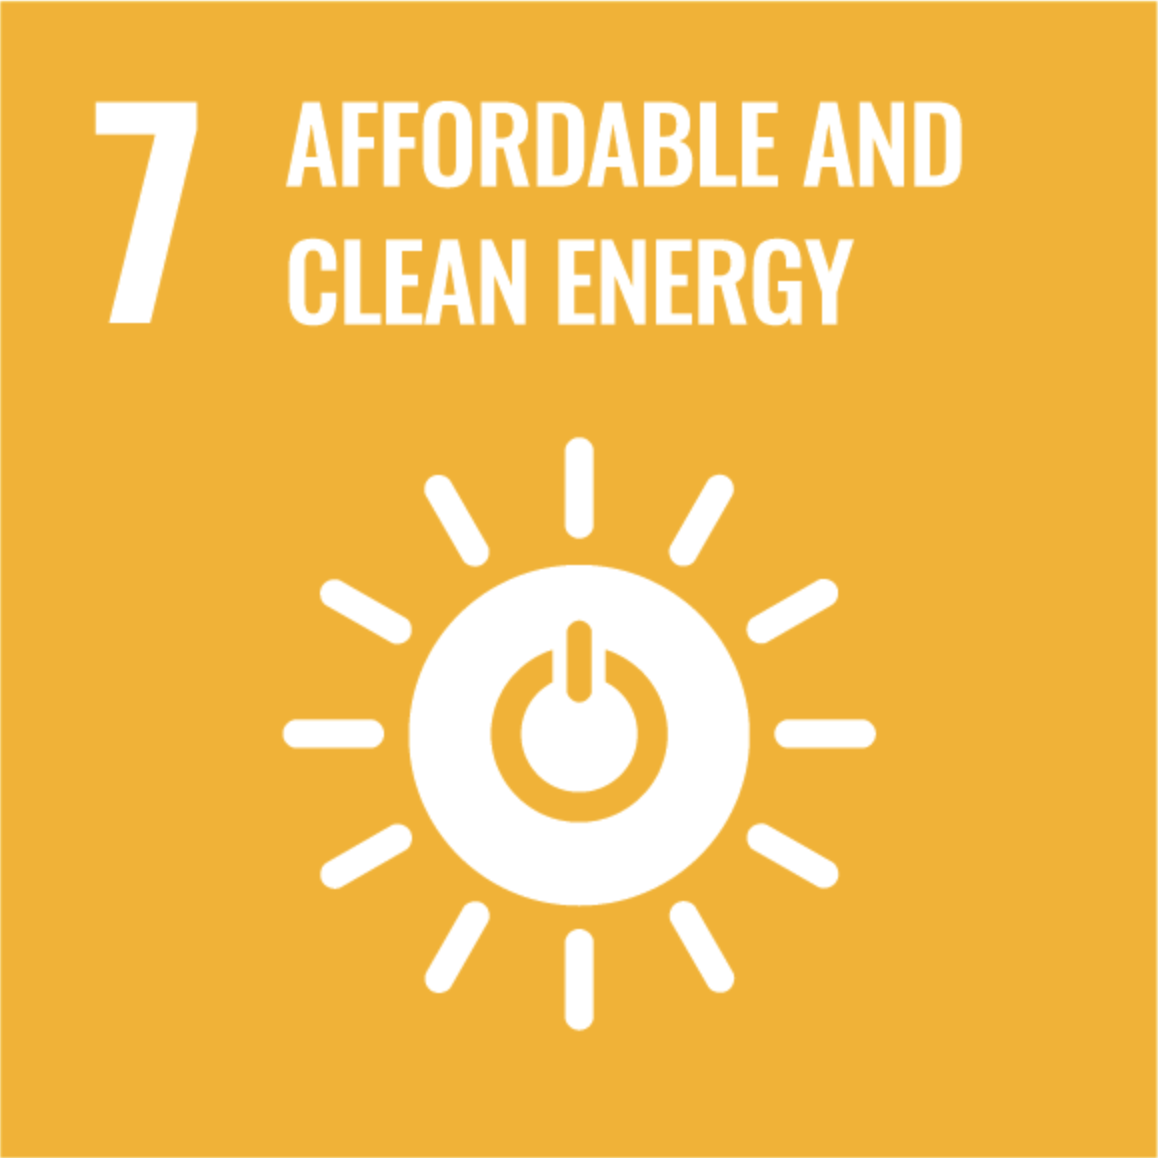 Goal 7: Affordable and Clean Energy